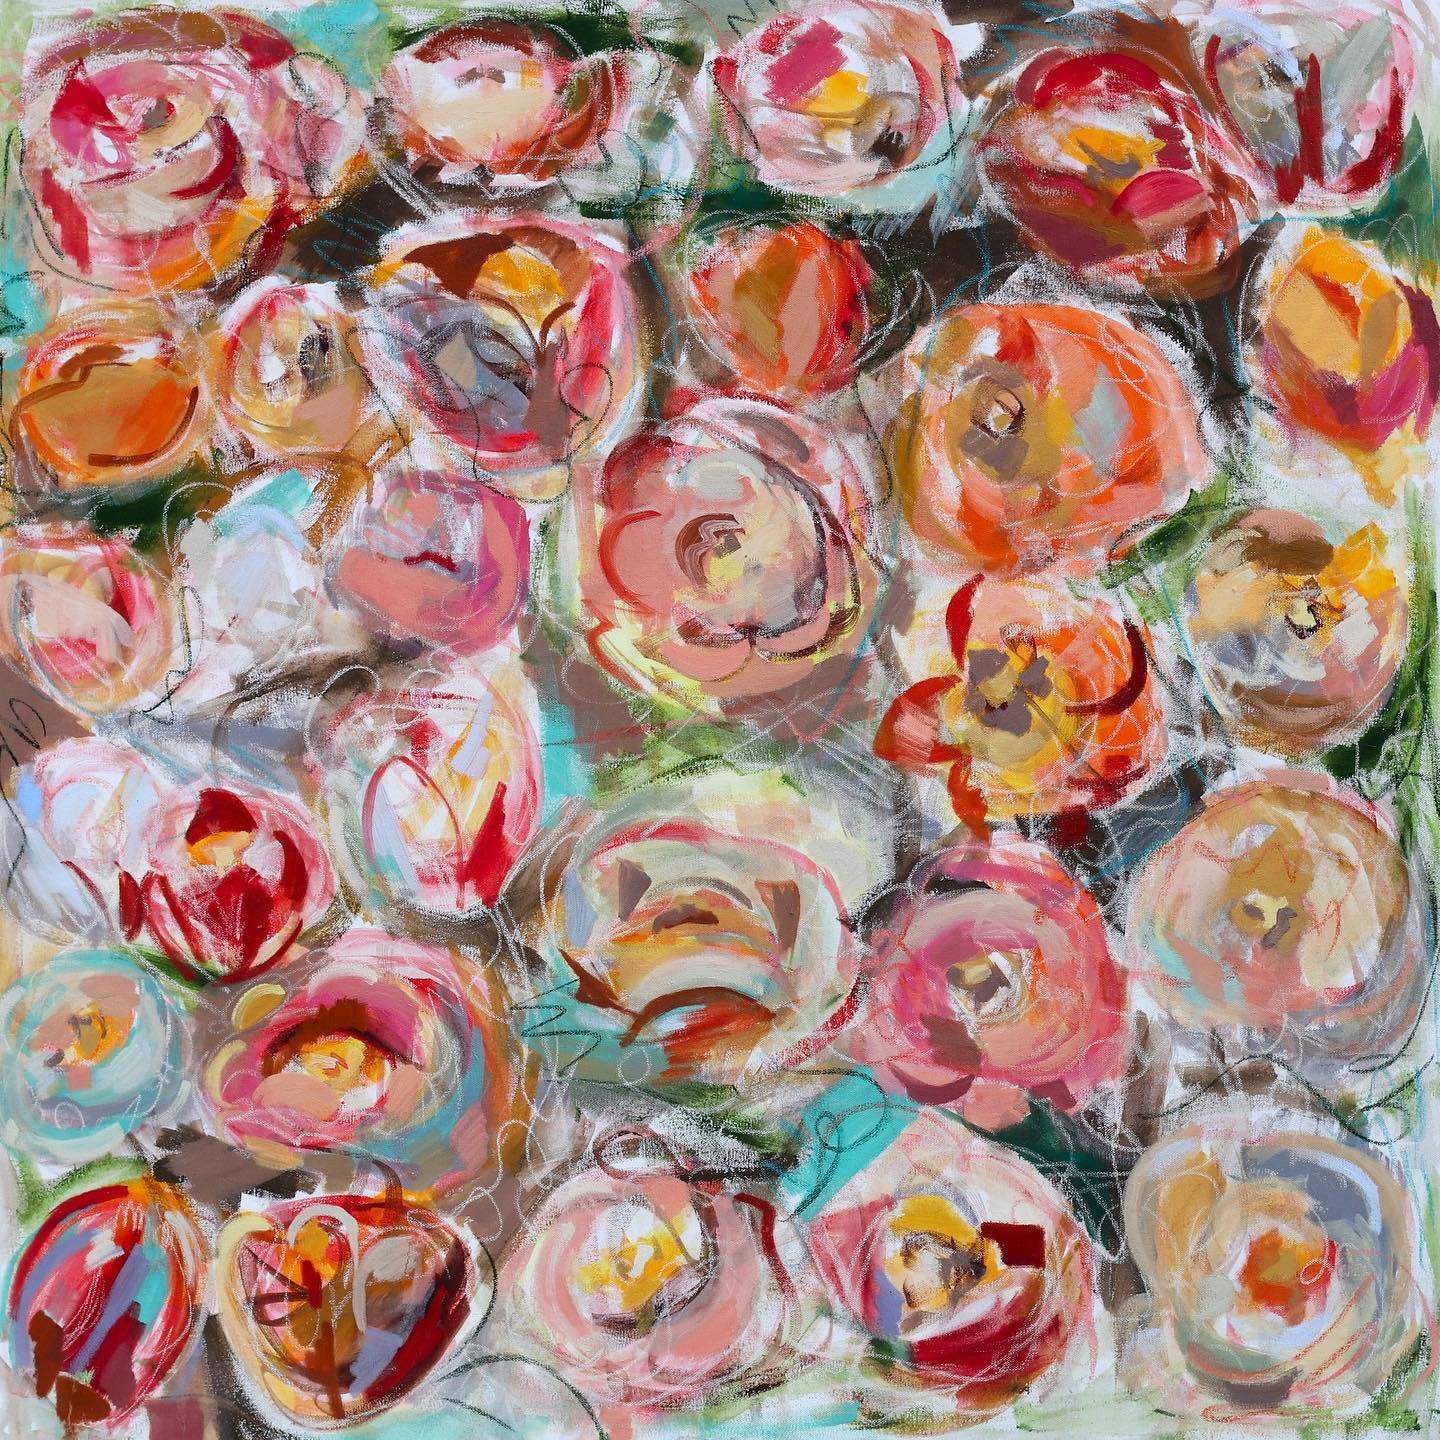 may&rsquo;s here &amp; the garden is blooming
(just posted this new big floral abstract on the website&hellip;)
&bull;
&ldquo;April Showers May Flowers&rdquo;
2024. Oil on canvas. 36x36 inches.